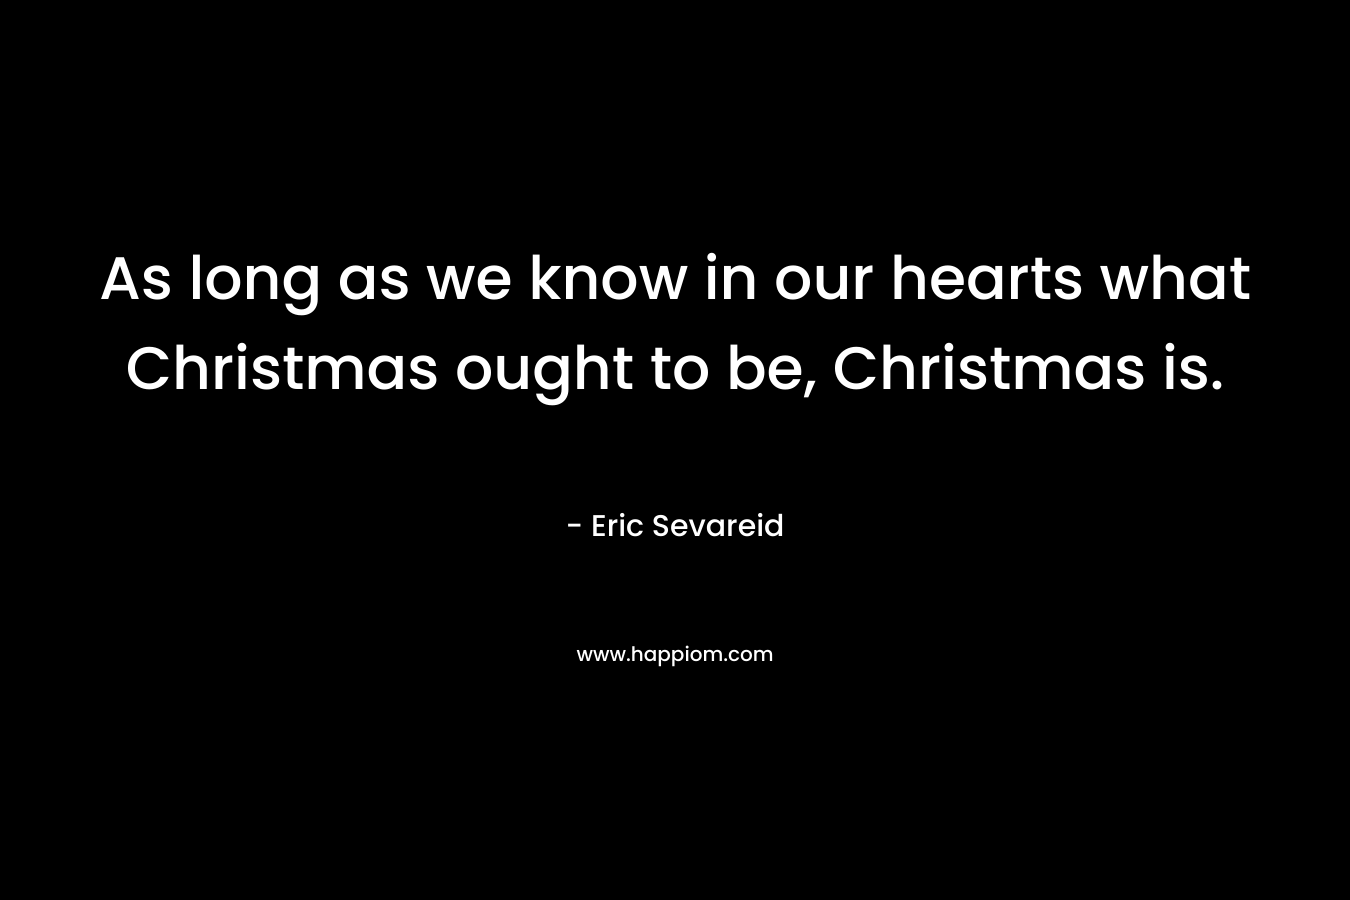 As long as we know in our hearts what Christmas ought to be, Christmas is.